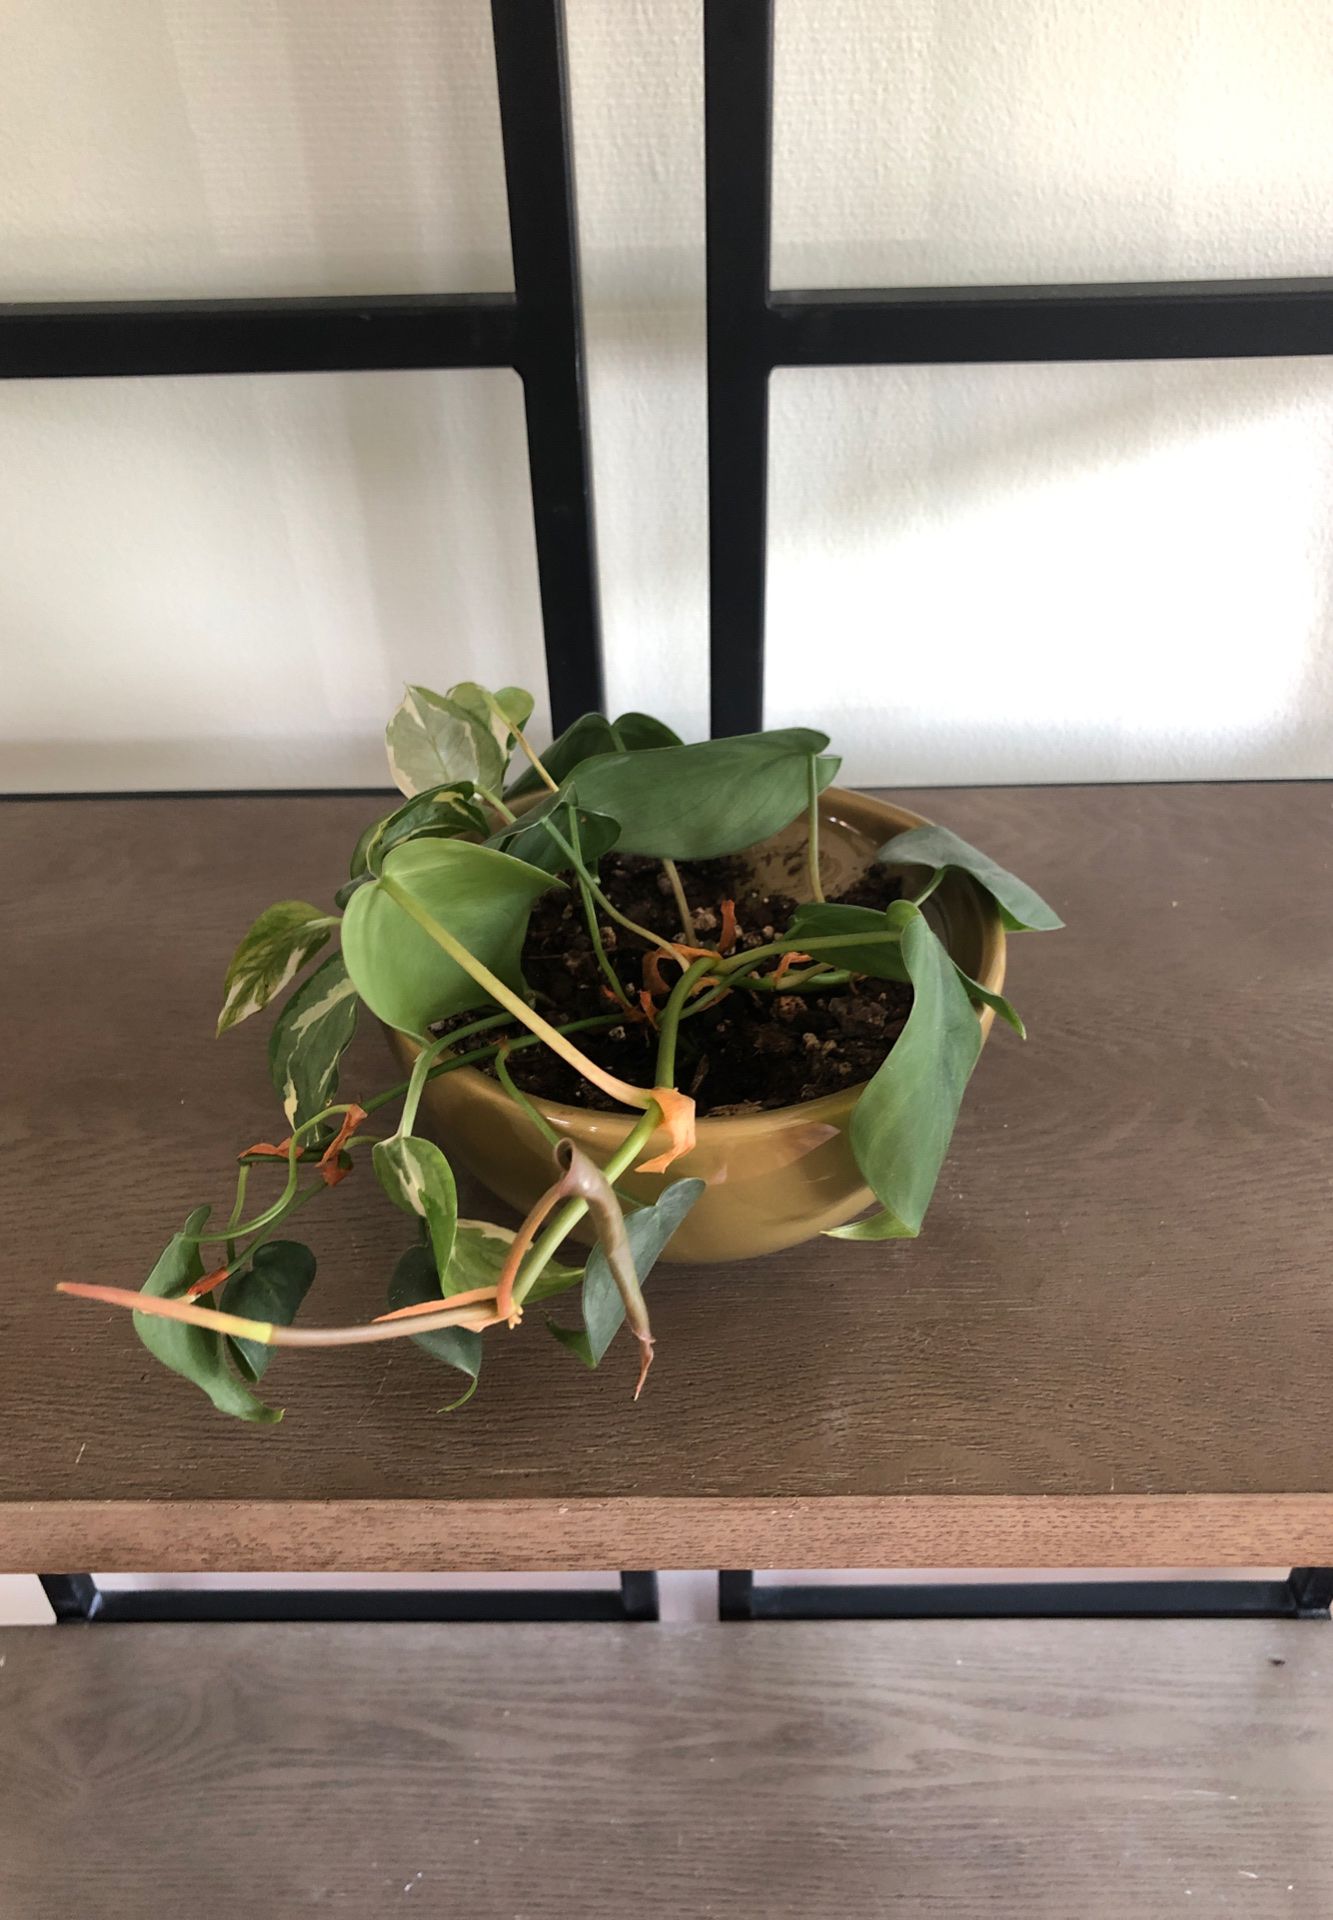 Philodendron and Pothos plants